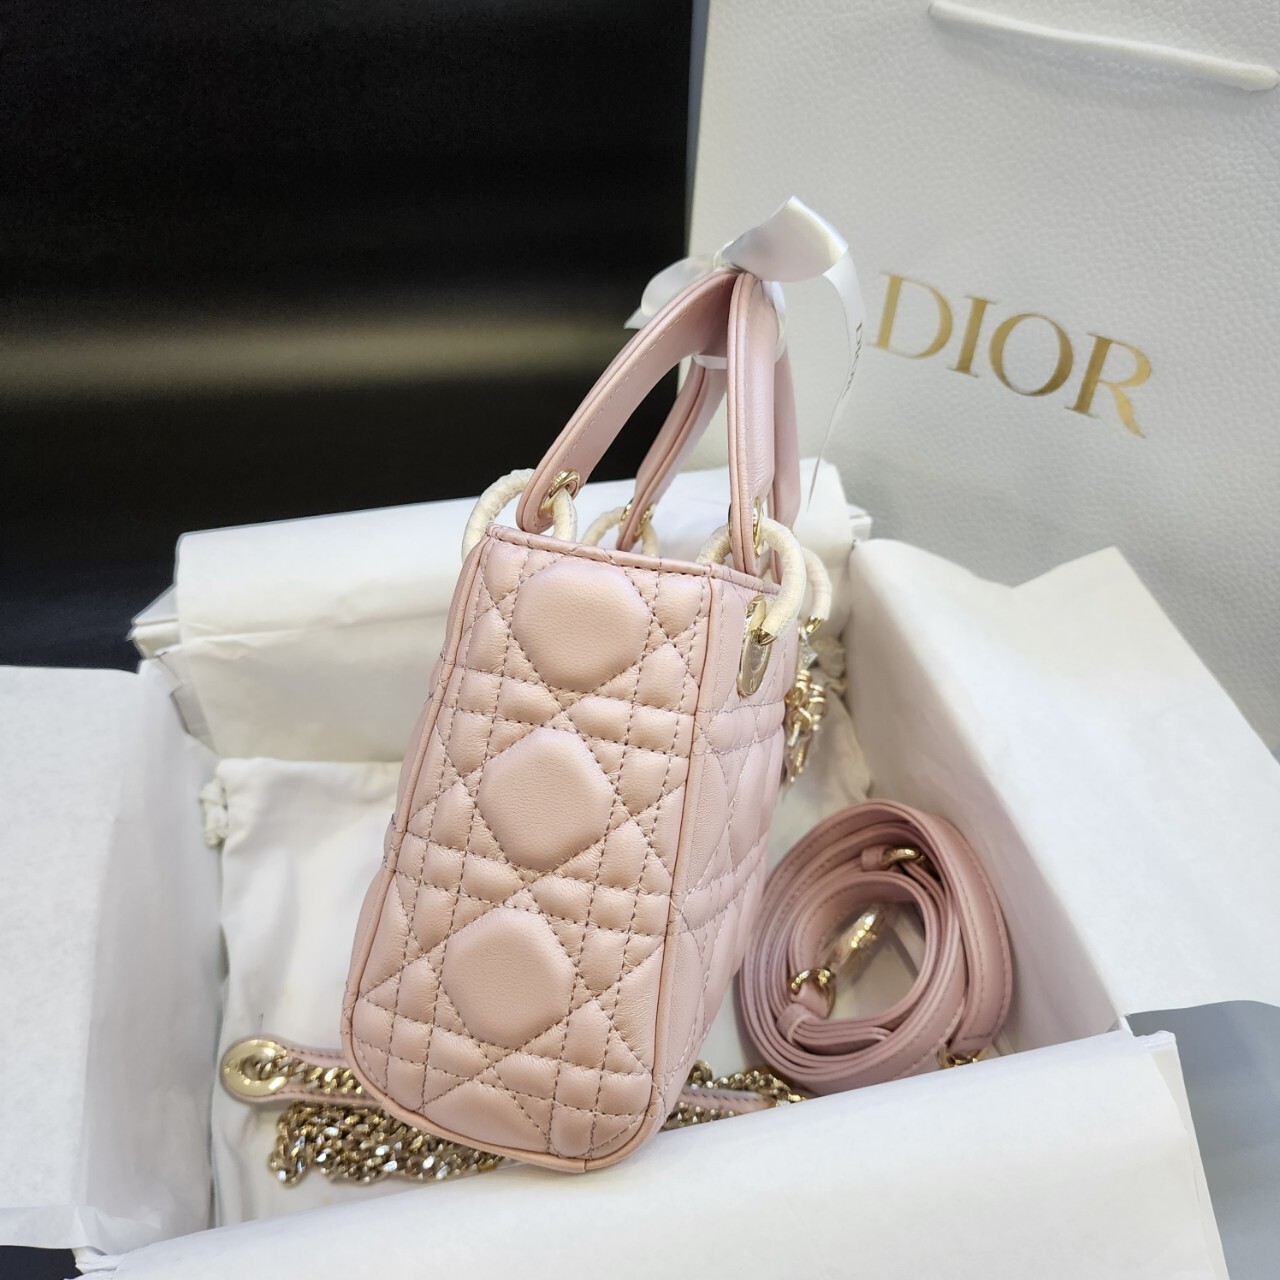 What you need to know before buying the Lady Dior  SACLÀB